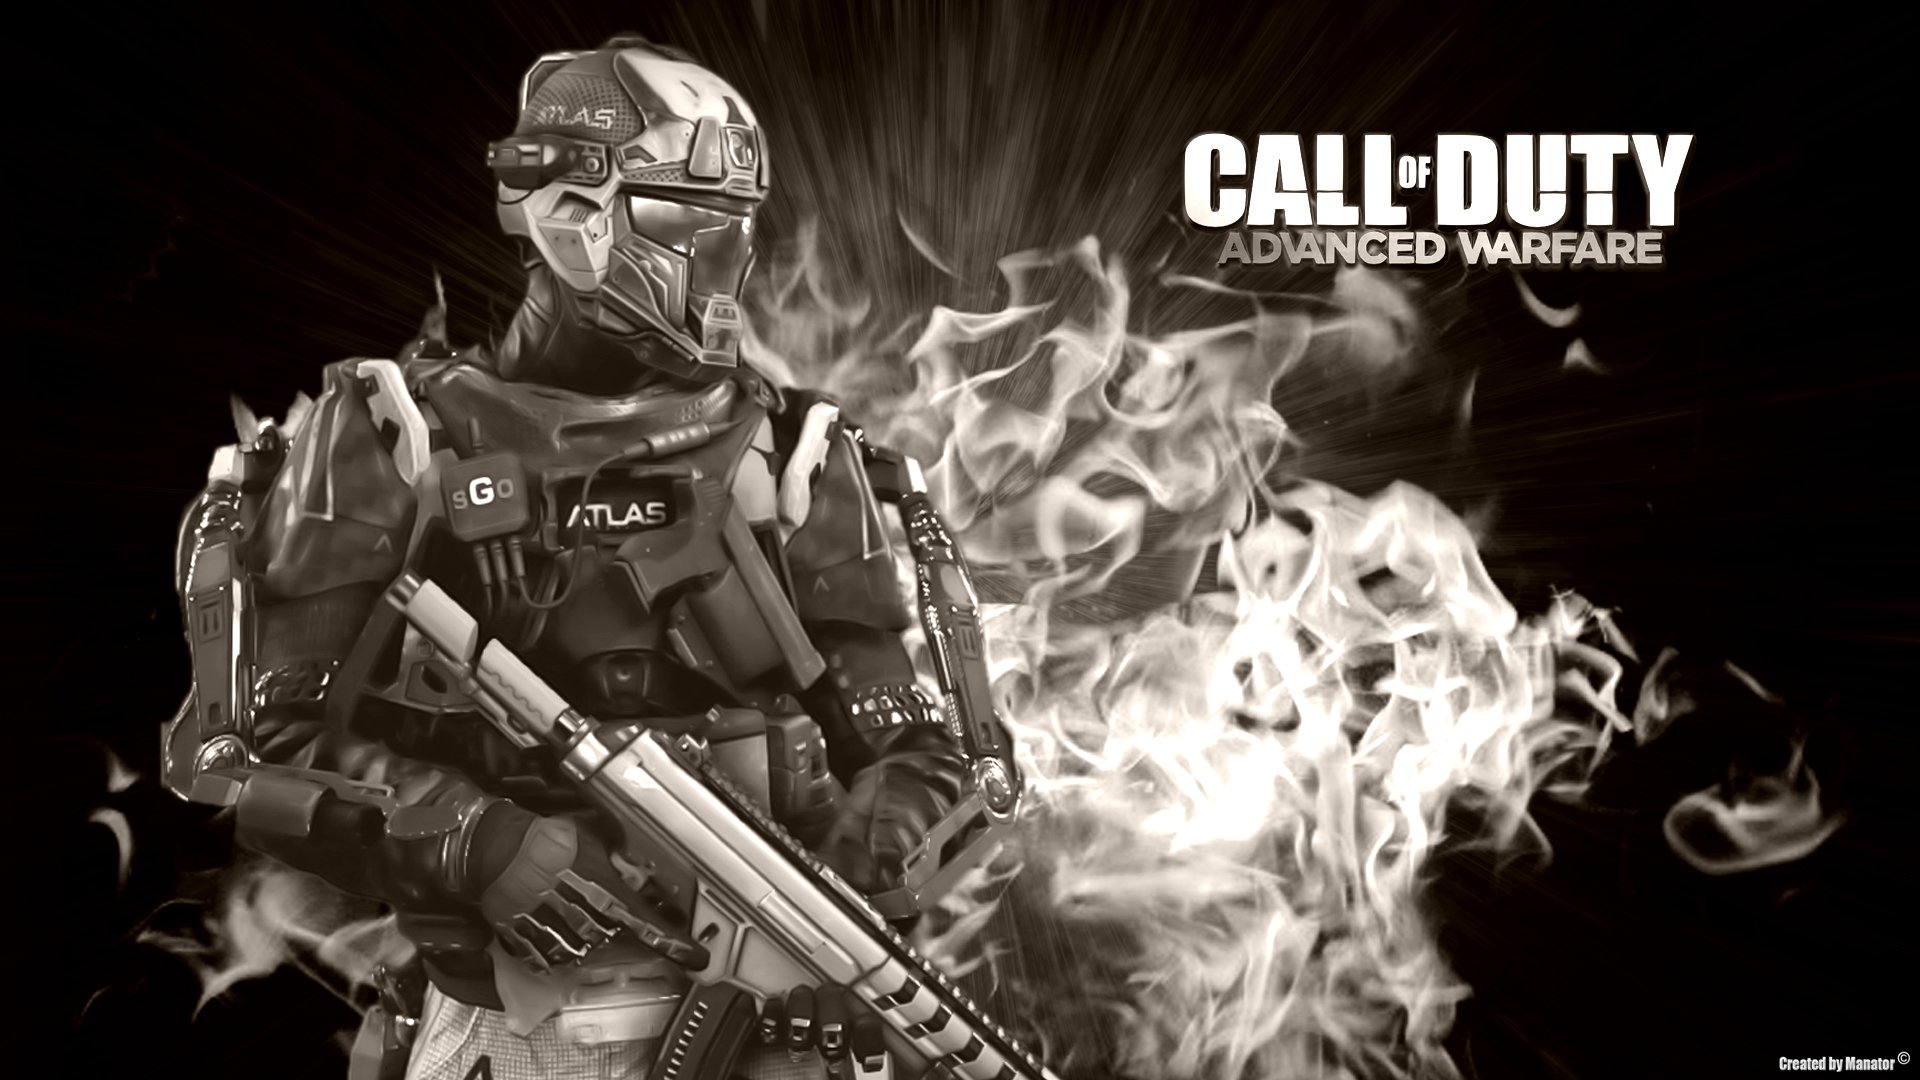 call, Of, Duty, Advanced, Warfare, Tactical, Shooter, Stealth, Action, Military, Fighting, Cod, Sci fi, Warrior, Weapon, Gun, Poster Wallpaper